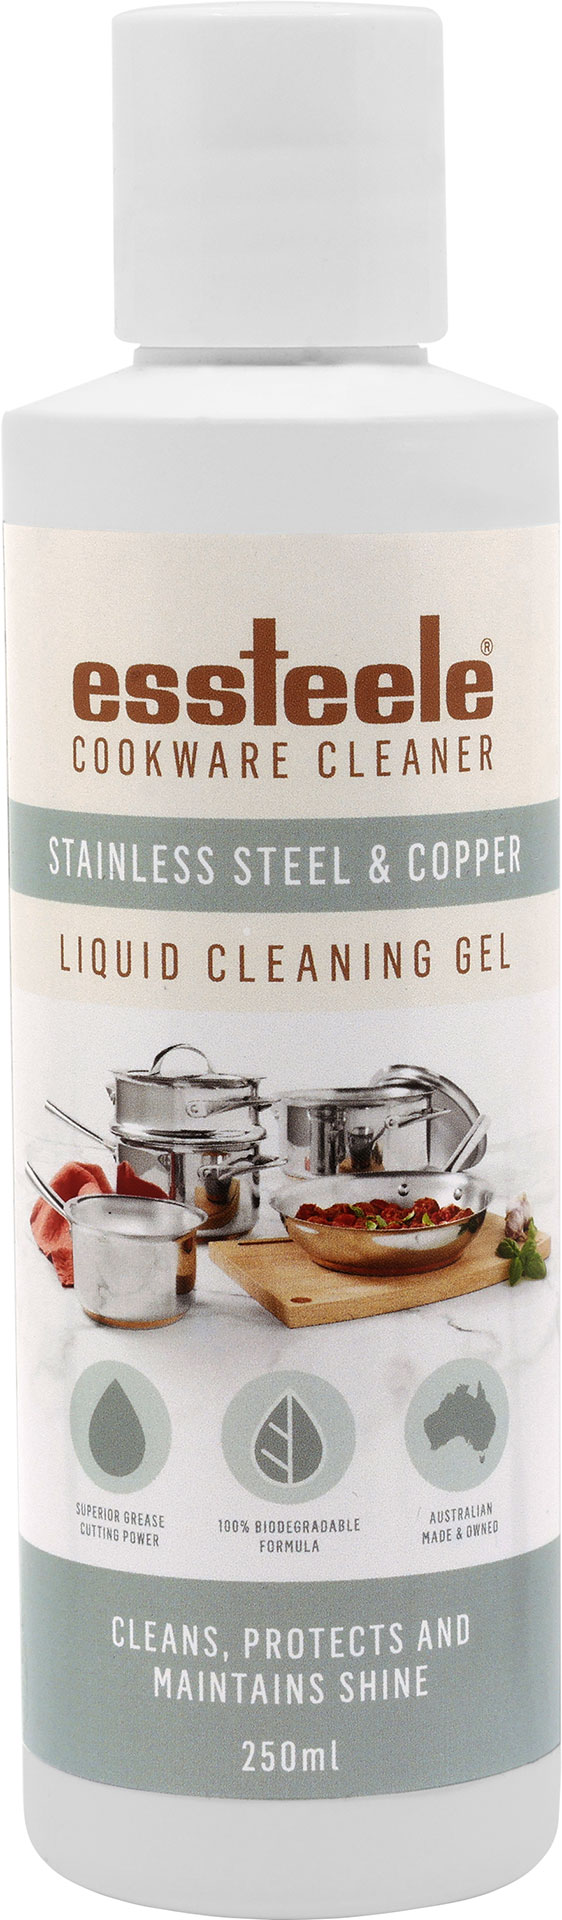 Essteele Liquid Cleaning Gel 250mL for Stainless Steel & Copper Cookware 601150